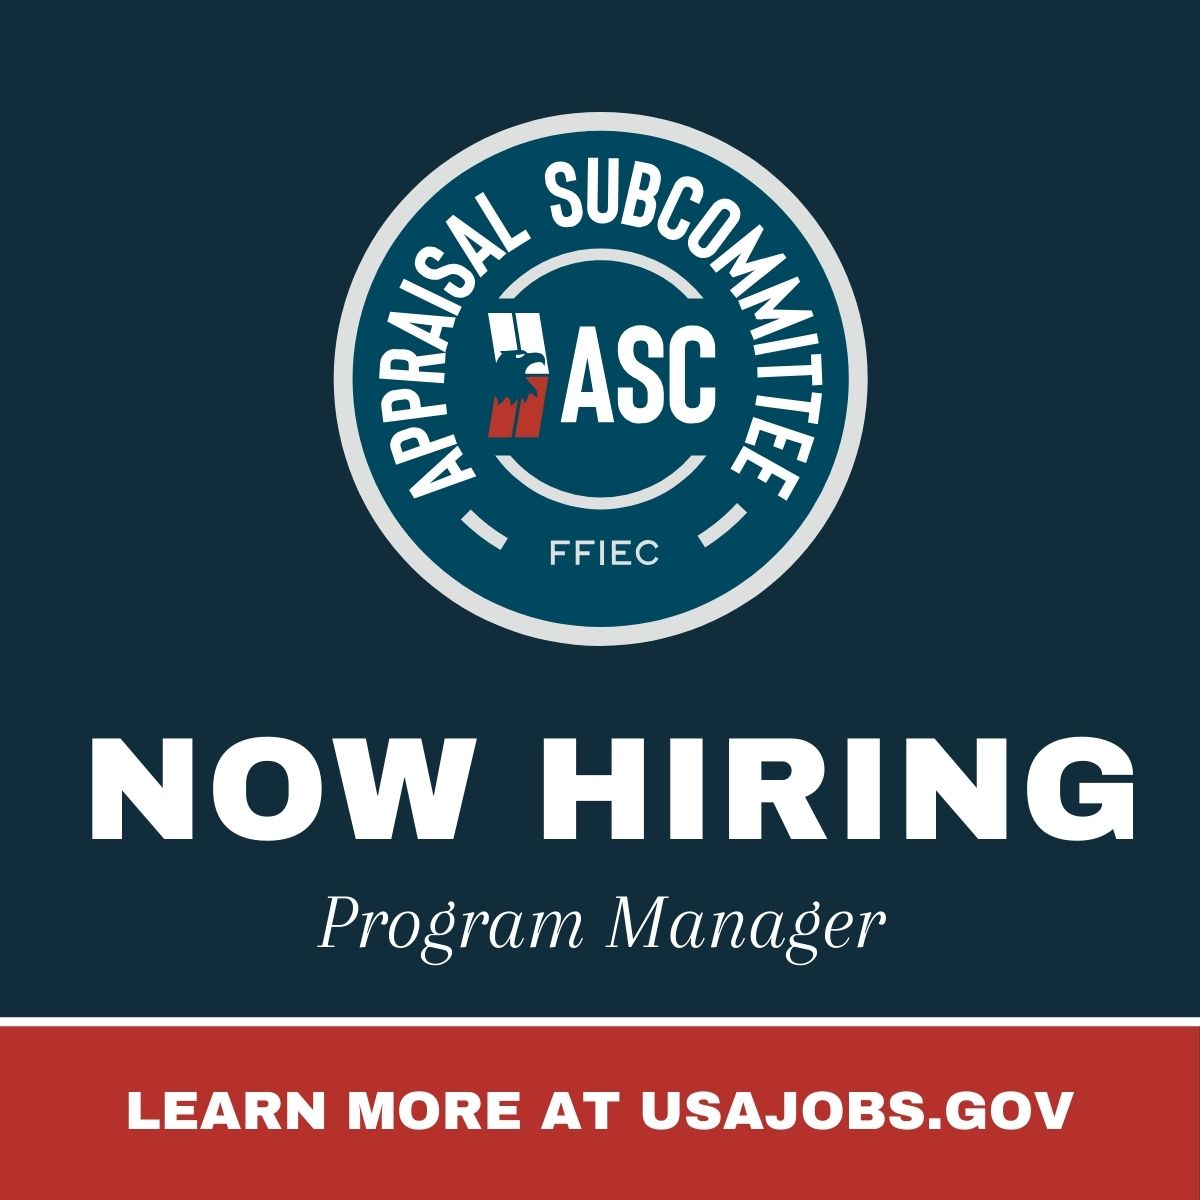 ASC has an opening for a Program Manager. The vacancy announcement can be viewed at usajobs.gov/job/791564700.

This position is open to all candidates and is a remote duty position. The vacancy announcement will close on May 22, 2024.

#ASCgov #Hiring #ProgramManager